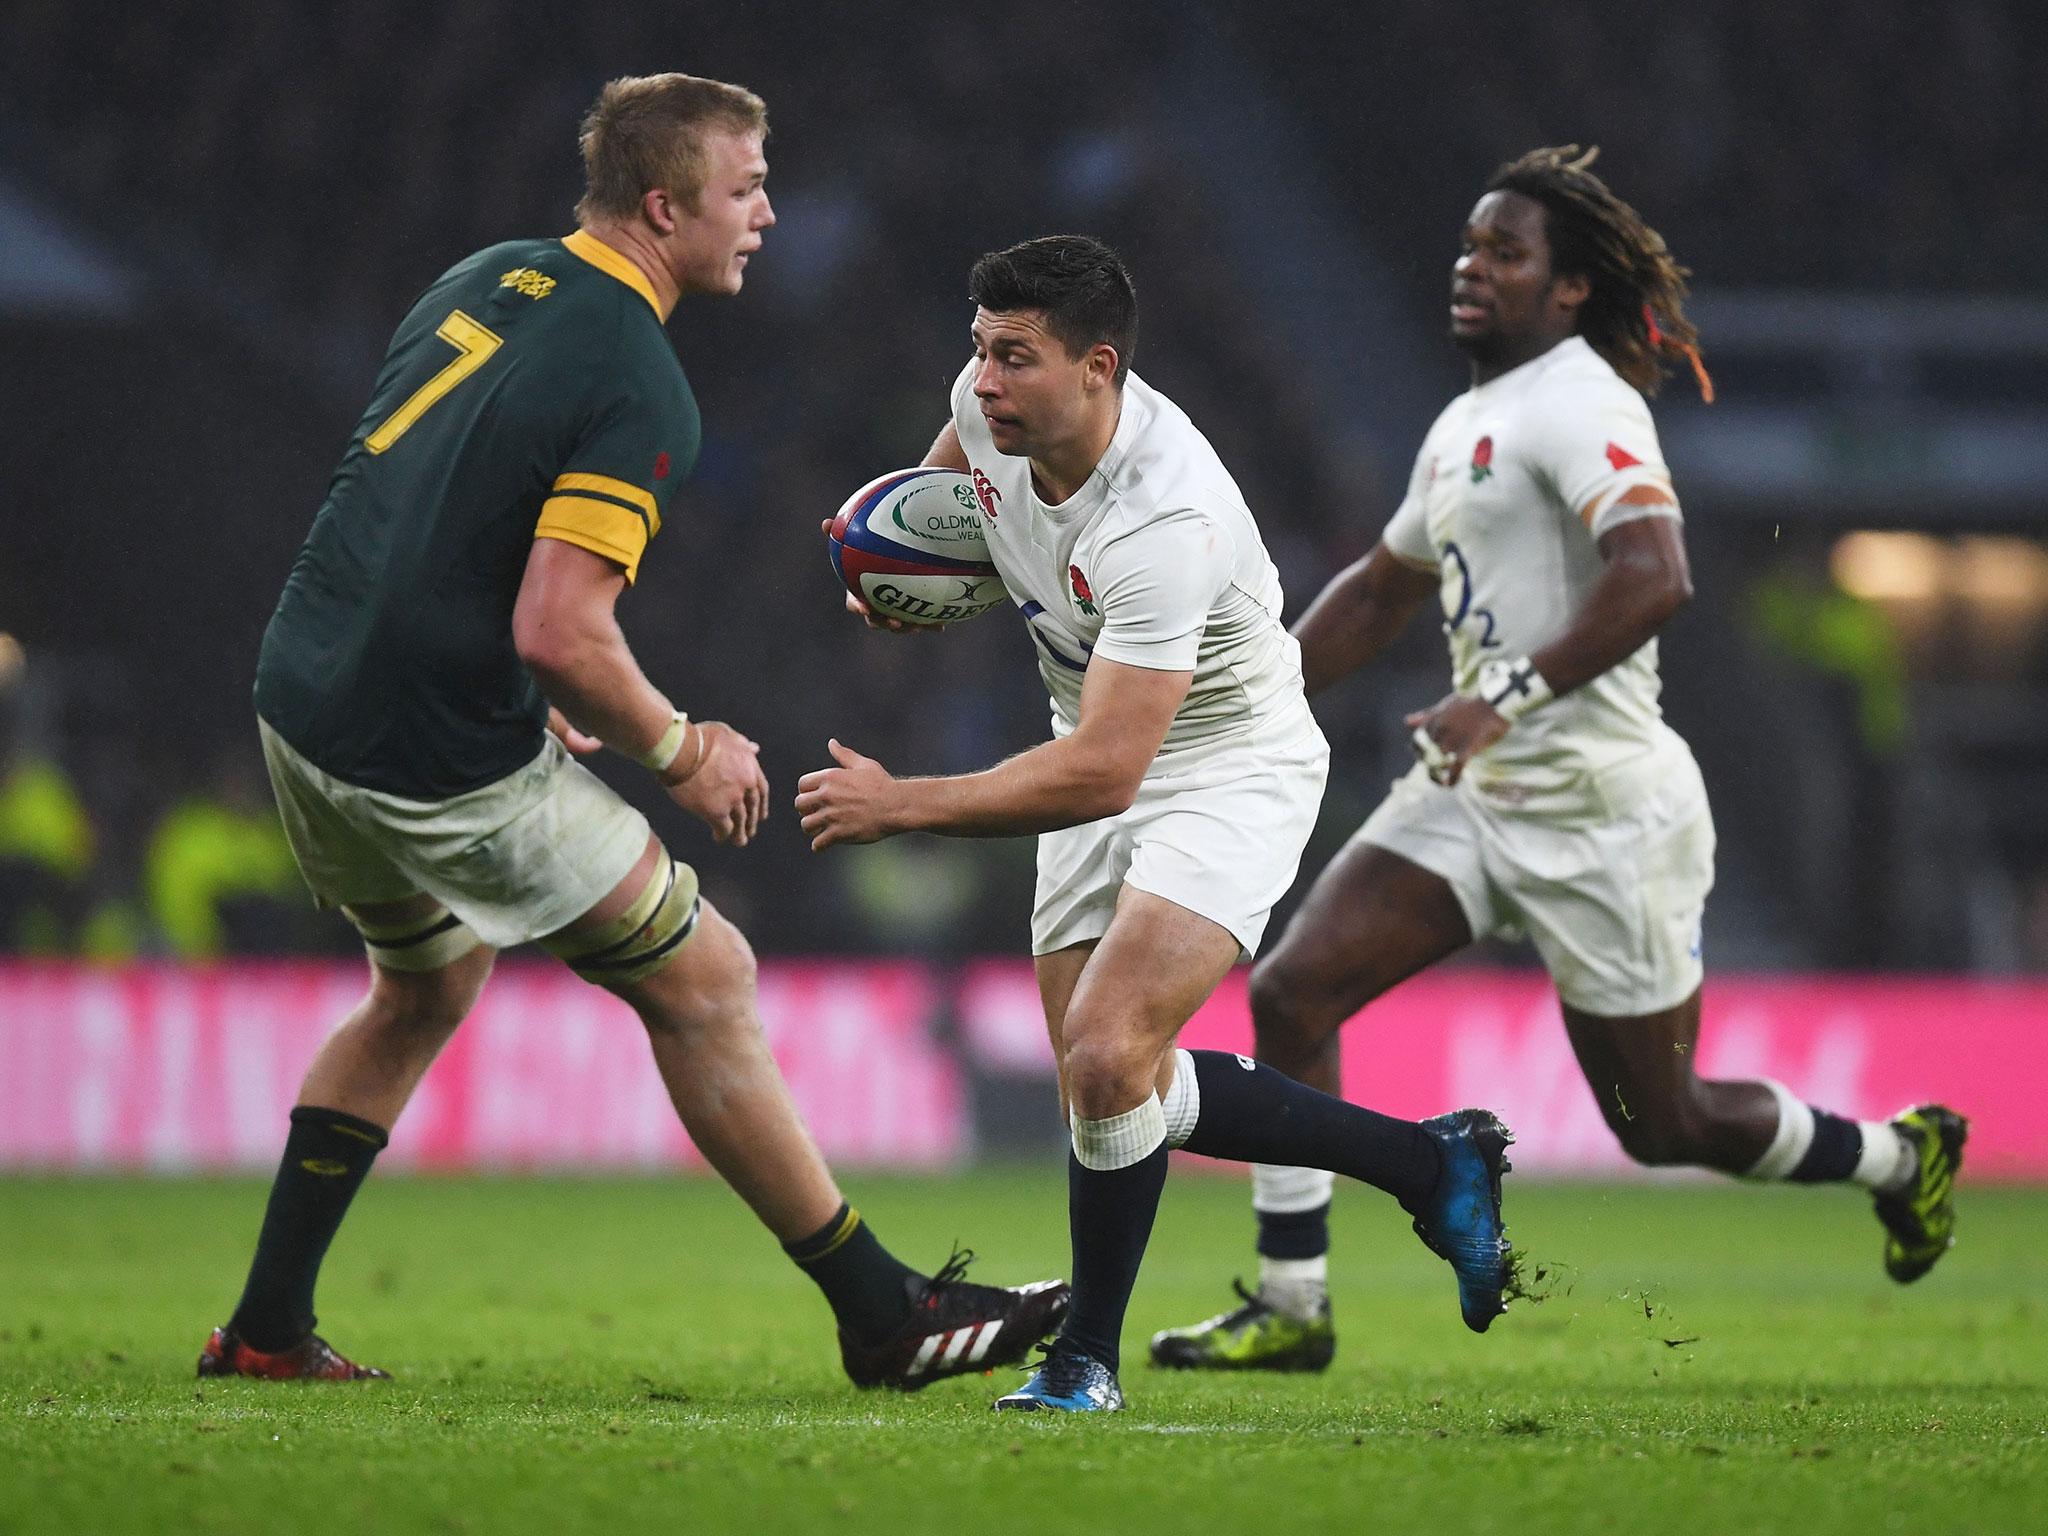 Ben Youngs dummied Pieter-Steph du Toit twice to set-up tries for George Ford and Owen Farrell